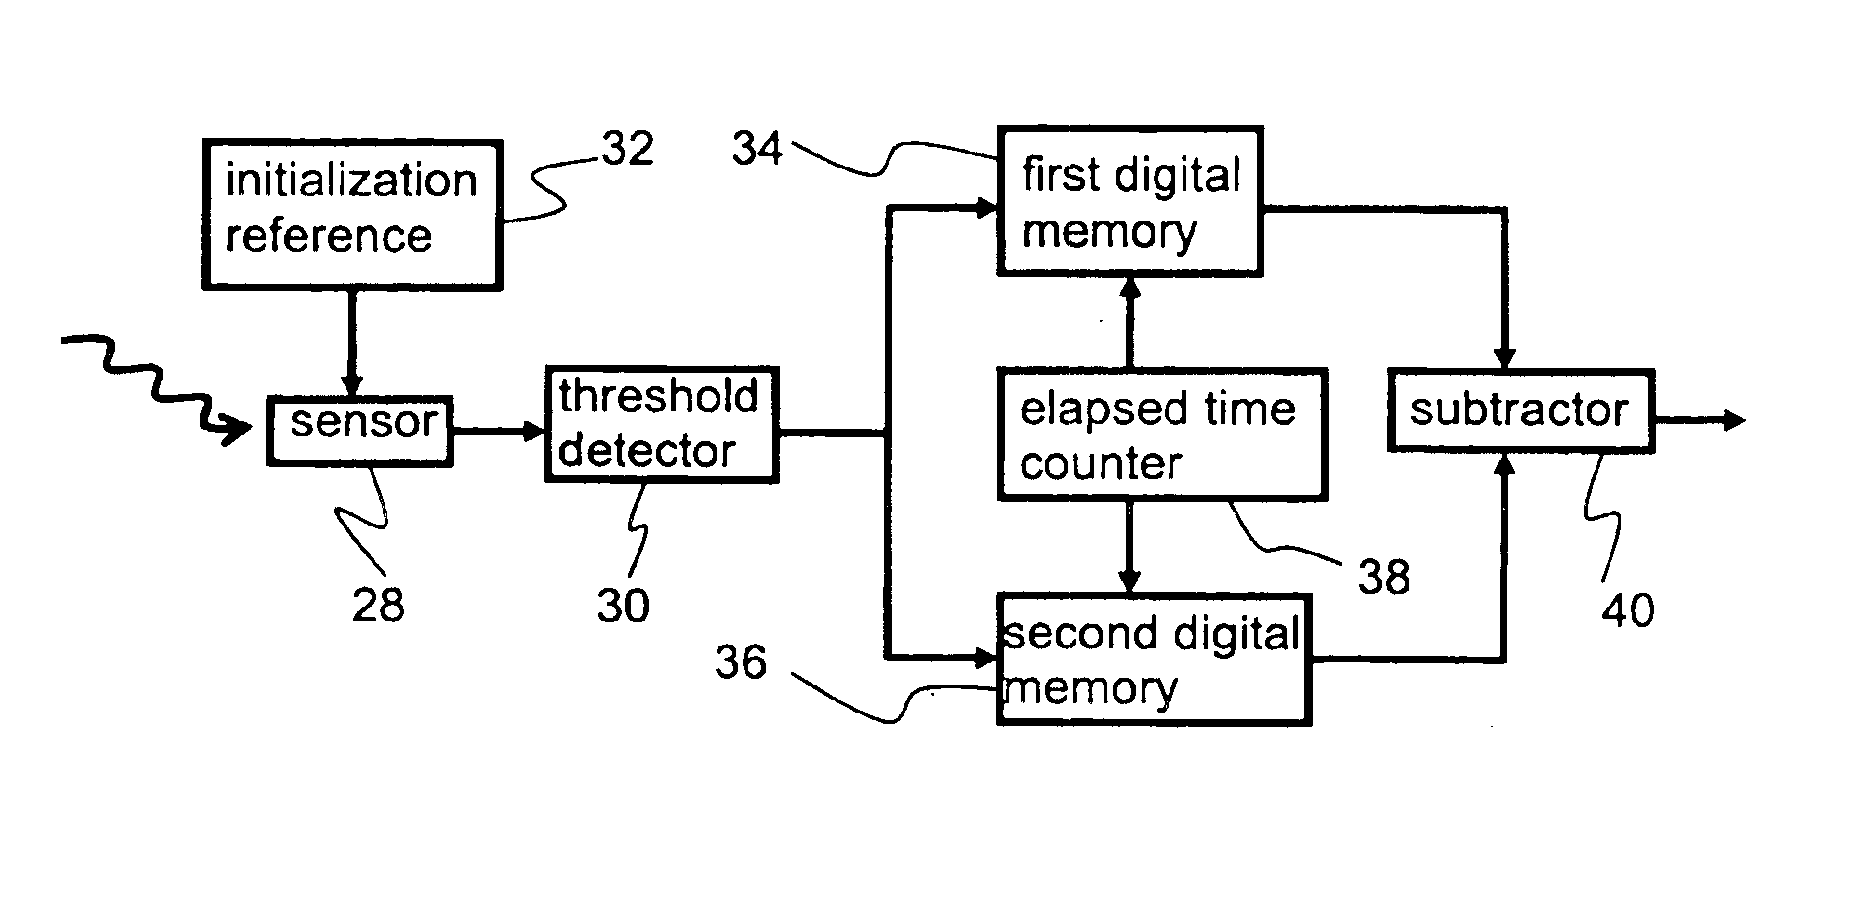 Differential time-to-threshold A/D conversion in digital imaging arrays